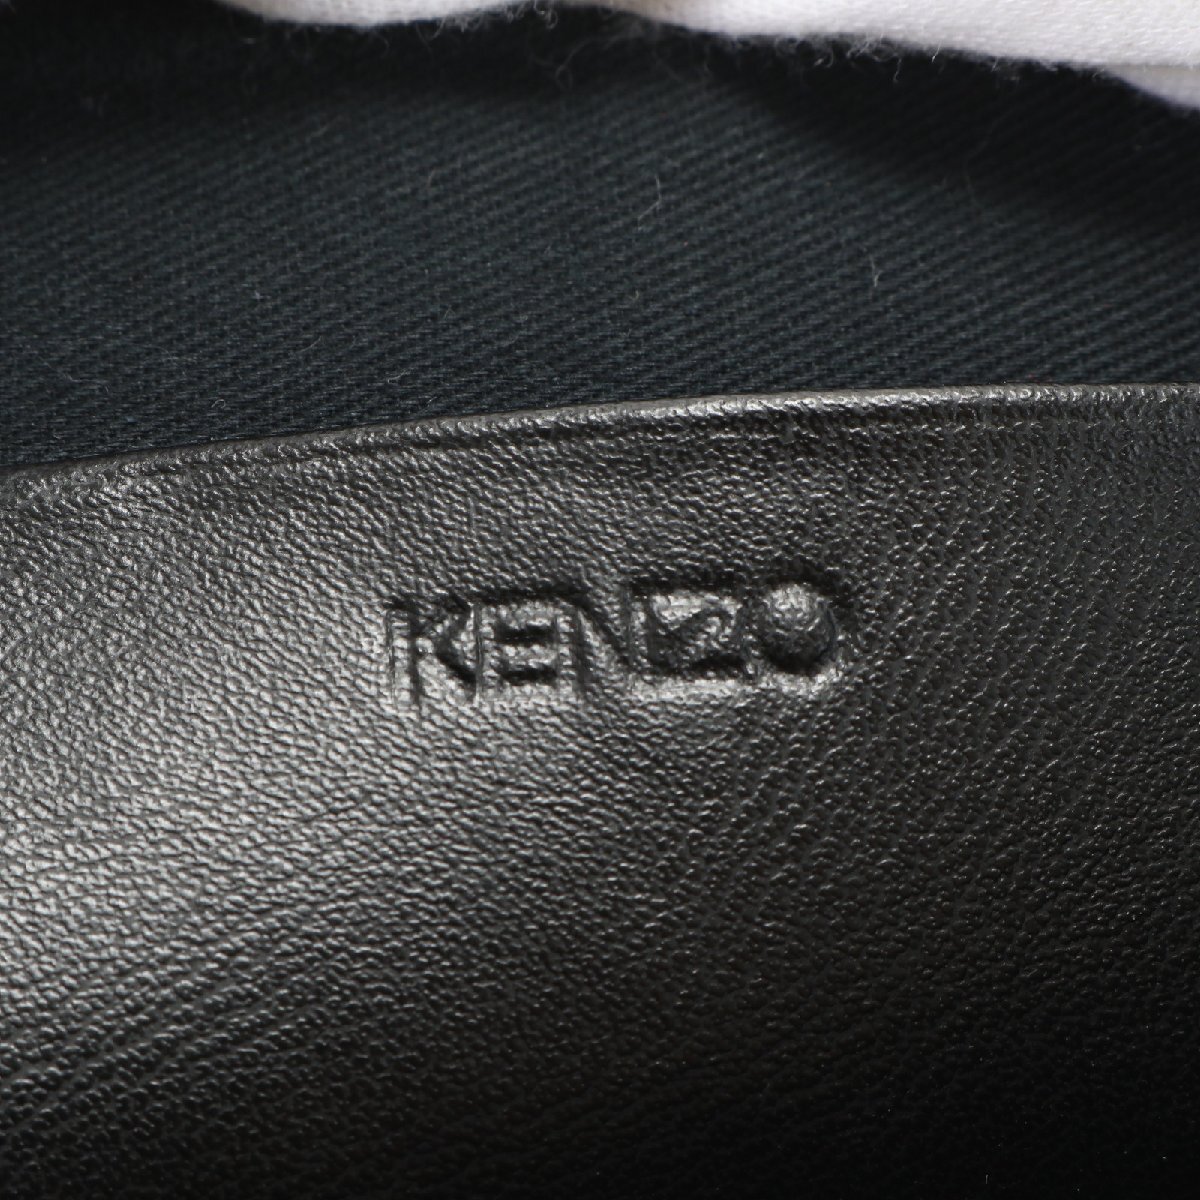 1 jpy # beautiful goods #KENZO# Kenzo # Aurora Logo leather second bag clutch document pouch commuting business tote bag black men's EEE O4-1